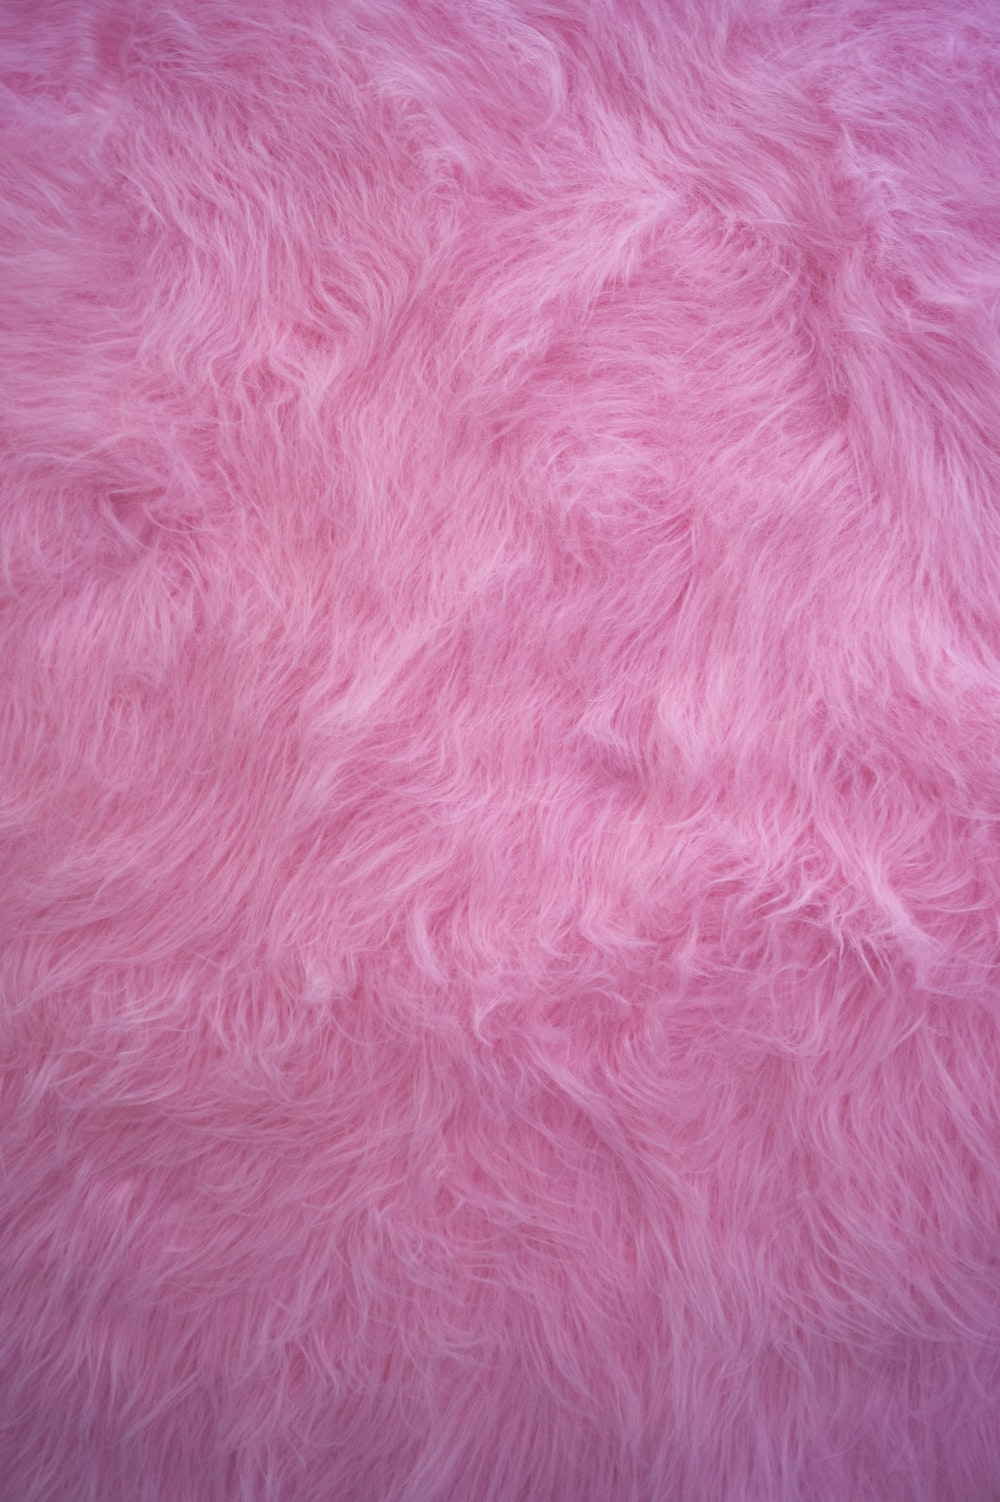 Pink Luxury Wool Natural Fluffy Fur Wool Skin Texture Close-up Use For  Background And Wallpaper Stock Photo, Picture and Royalty Free Image. Image  146665170.